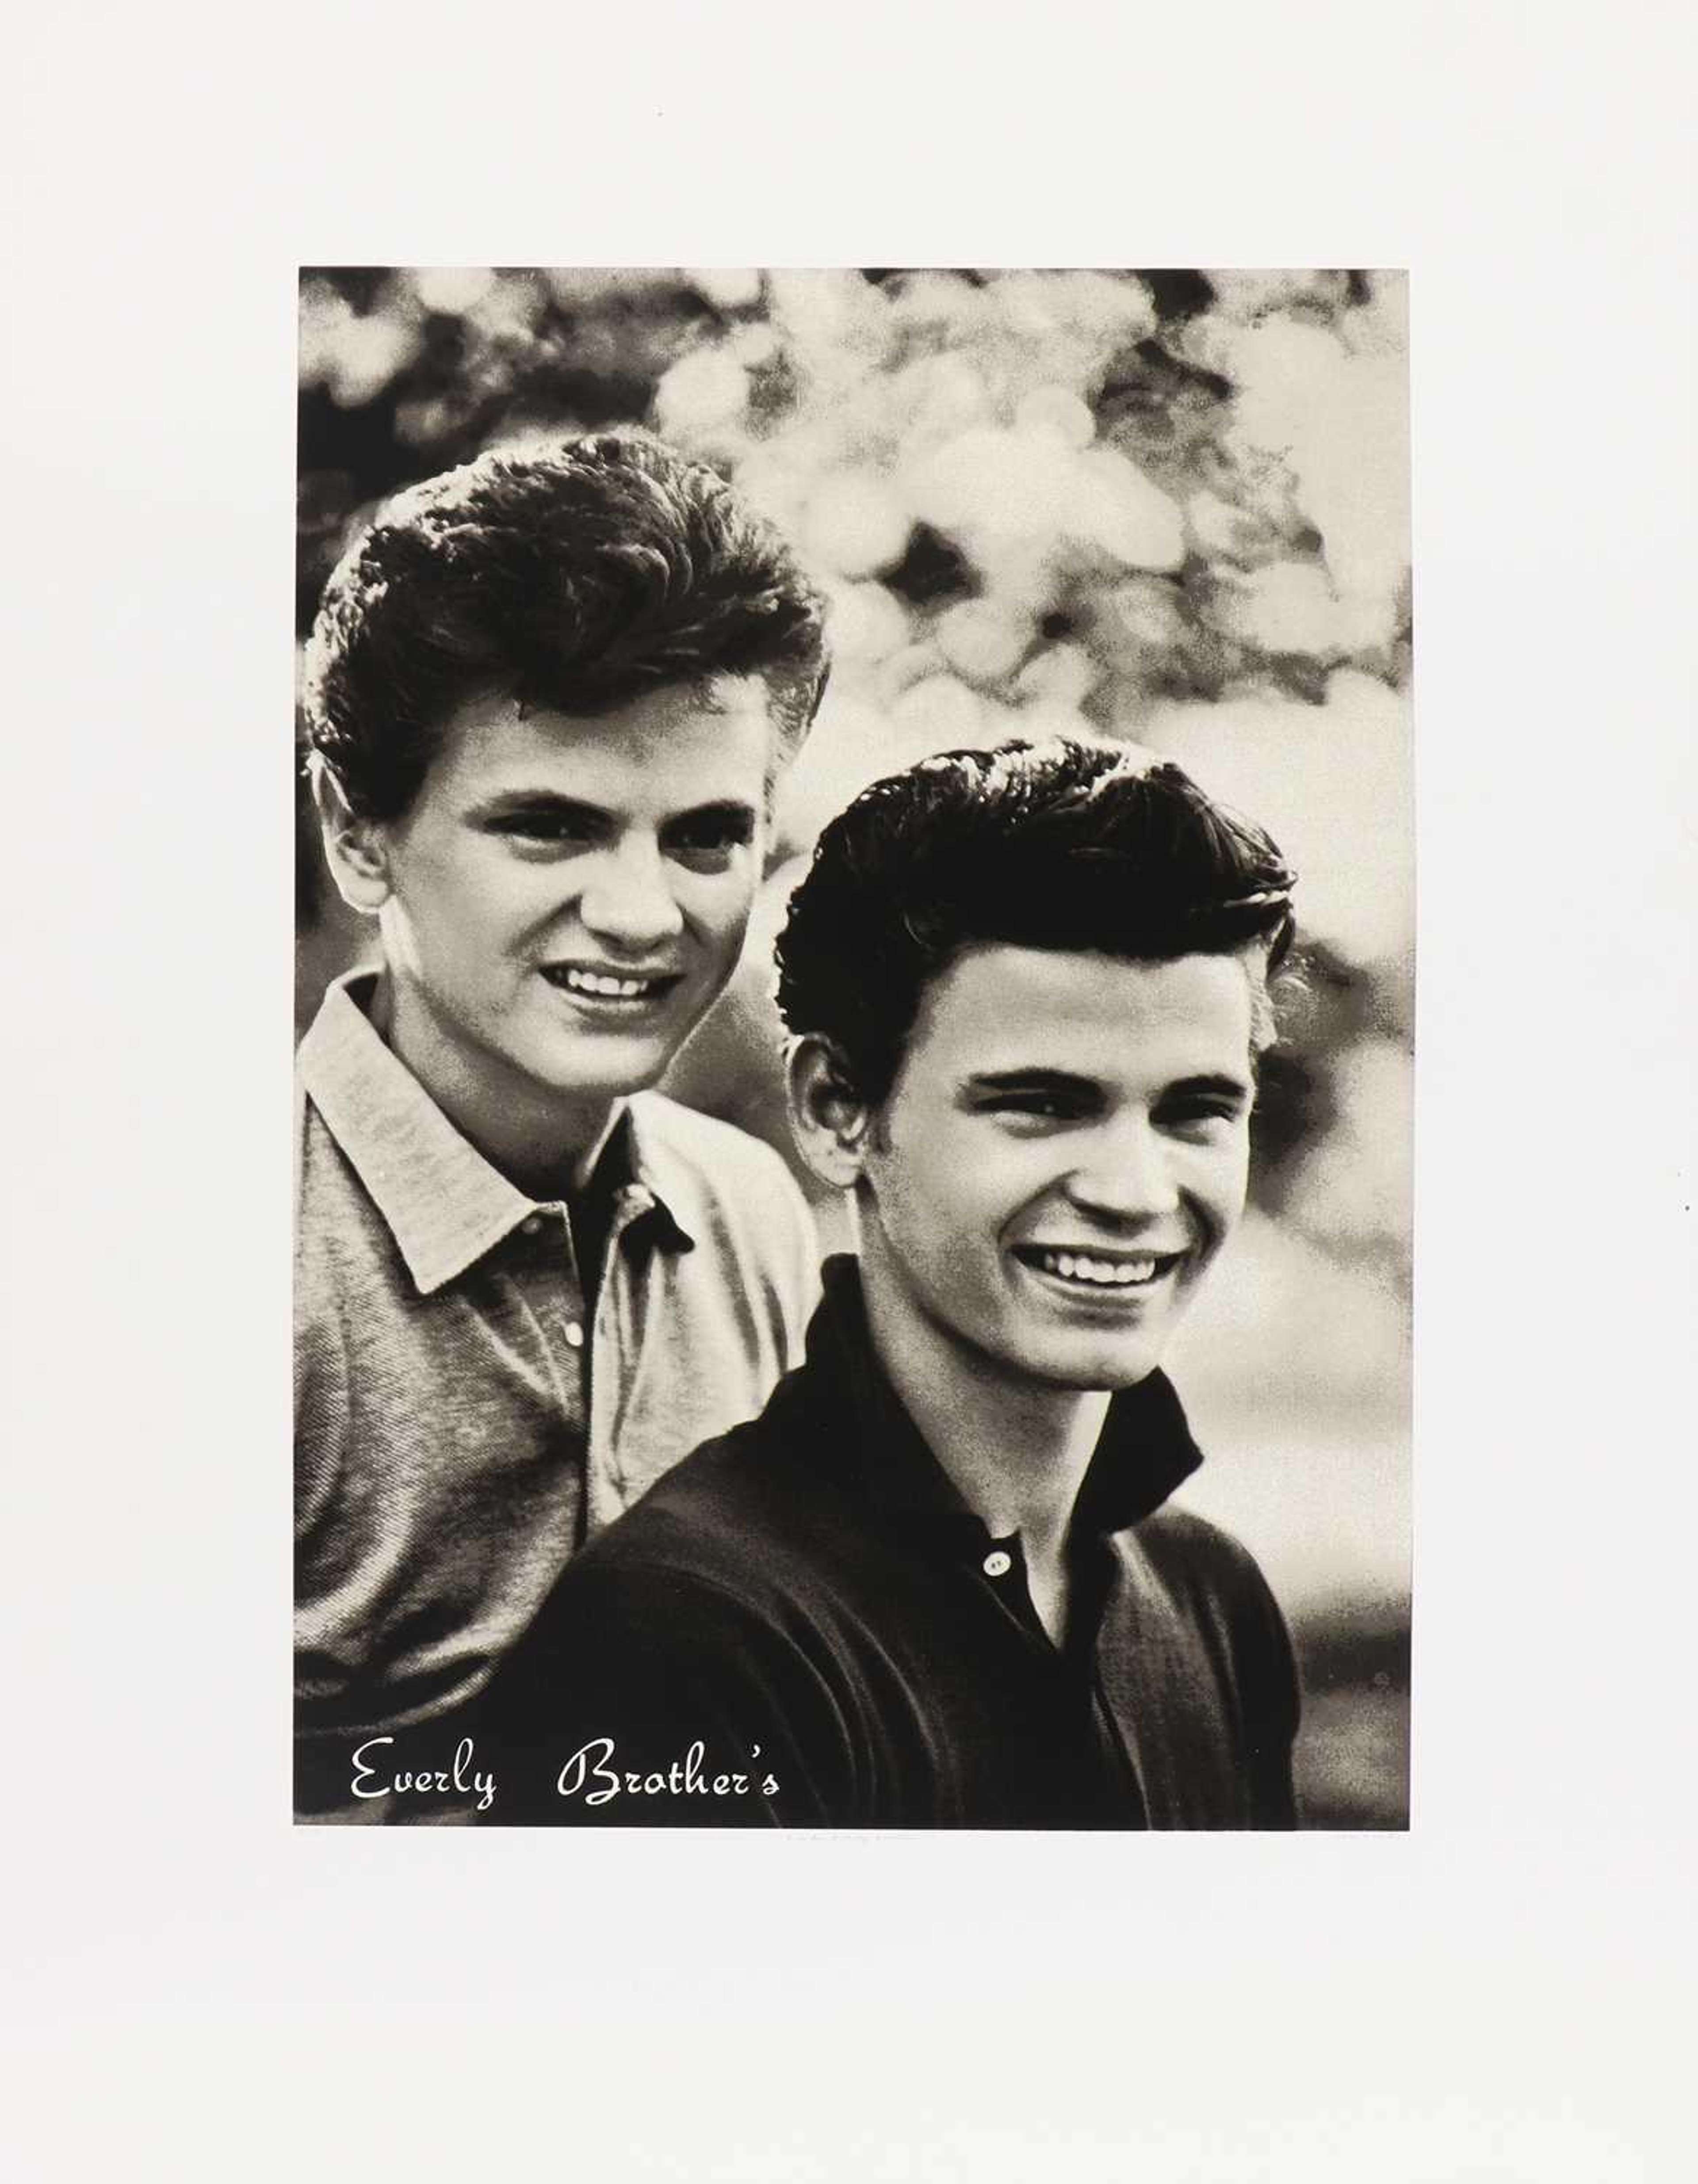 E Is For Everly Brothers - Signed Print by Peter Blake 1991 - MyArtBroker